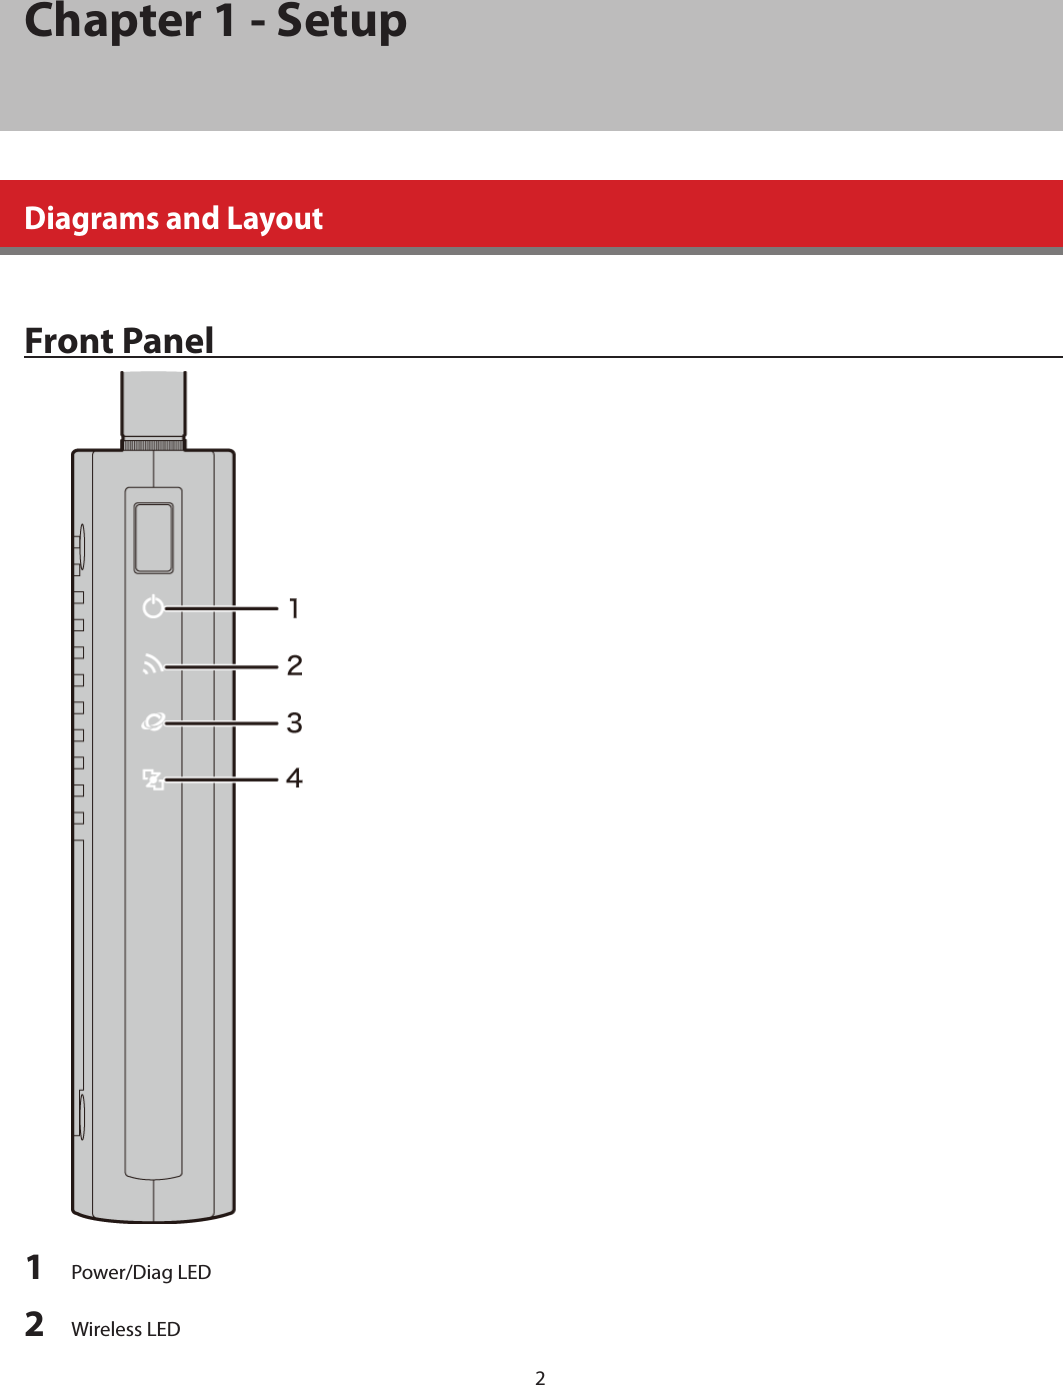 2Chapter 1 - SetupDiagrams and LayoutFront Panel1  Power/Diag LED 2  Wireless LED